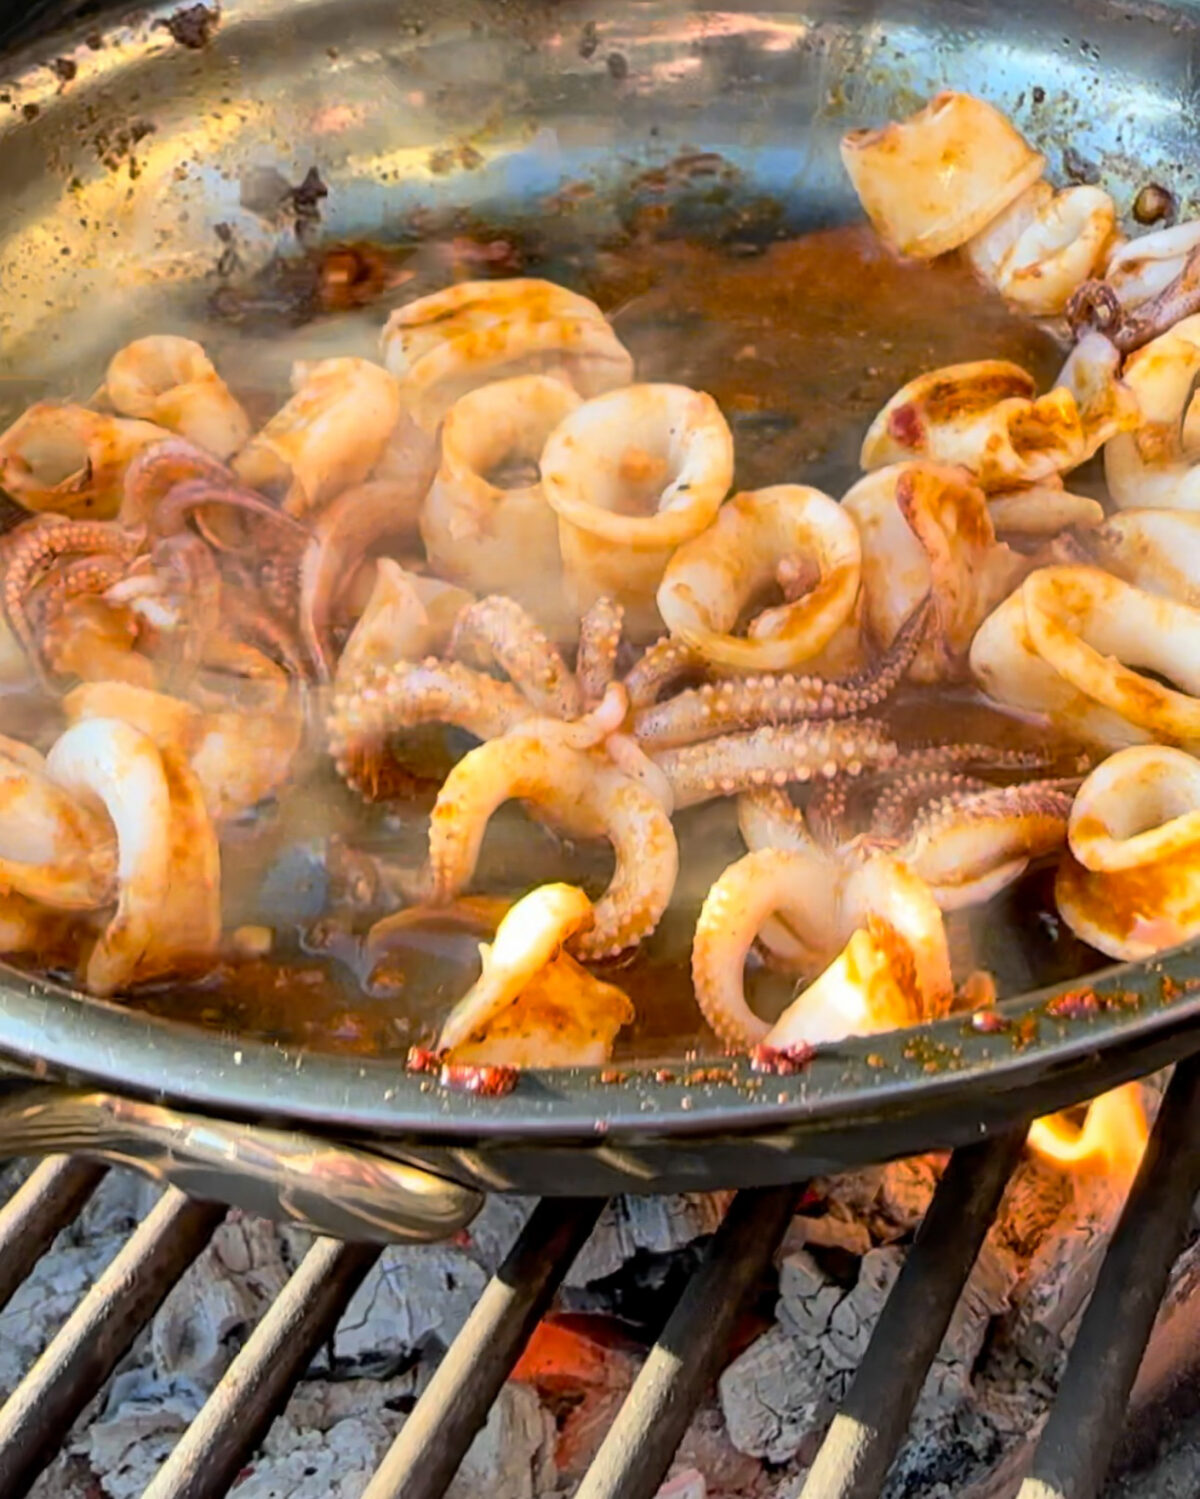 Add the baby squid to the skillet and cook until they turn opaque and curl up.